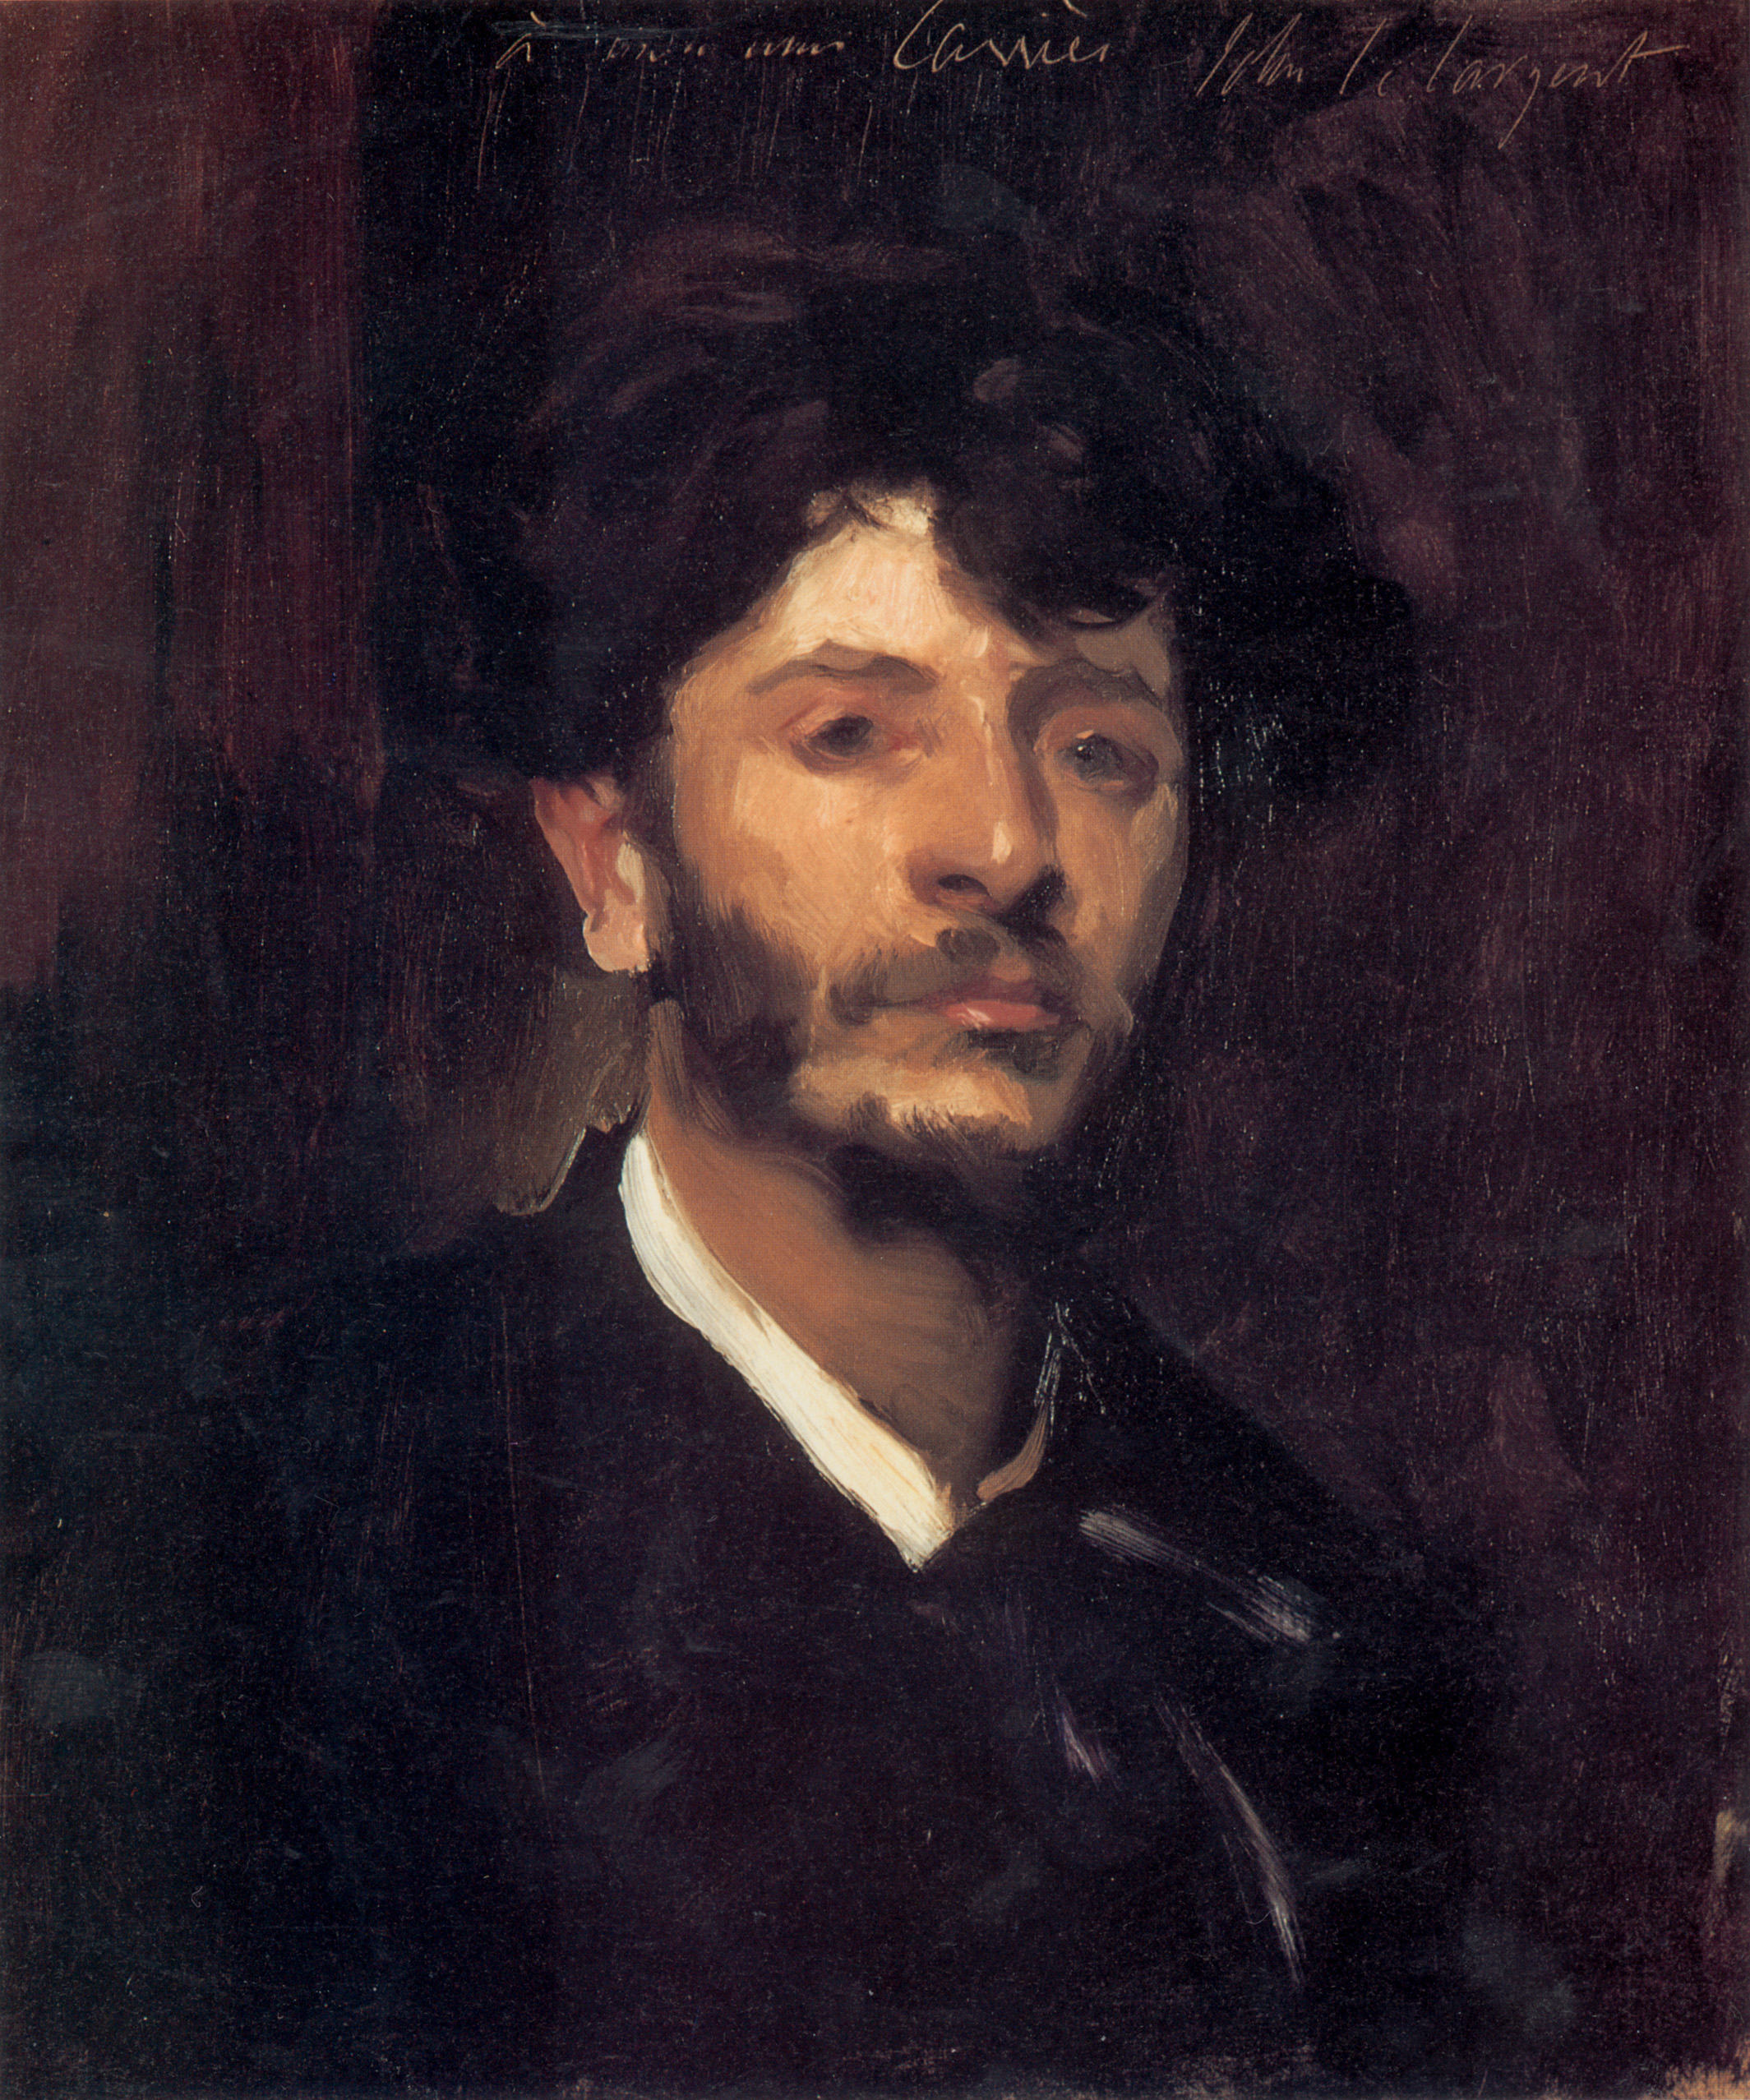 Portrait of Jean Joseph Marie Carries by John Singer Sargent. Even without the clear details of the face, Sargent manages to capture the likeness of his subject.